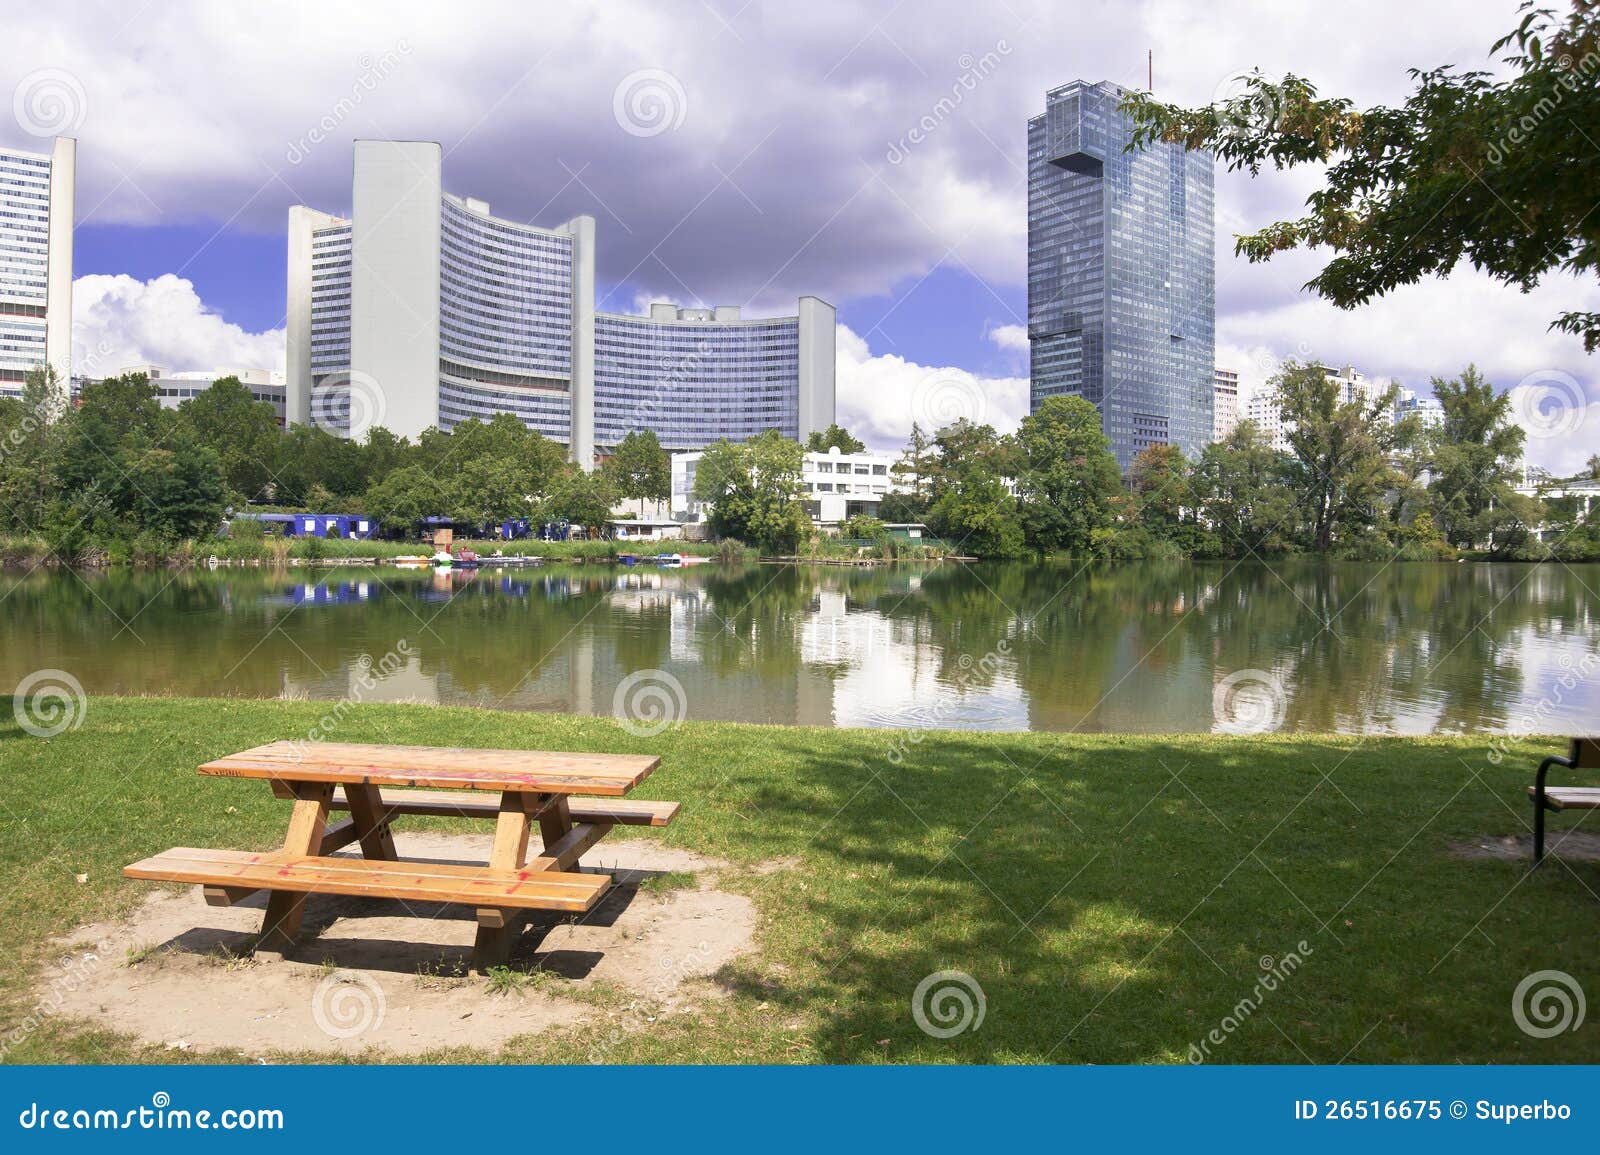 picnic park and modern buildings vienna